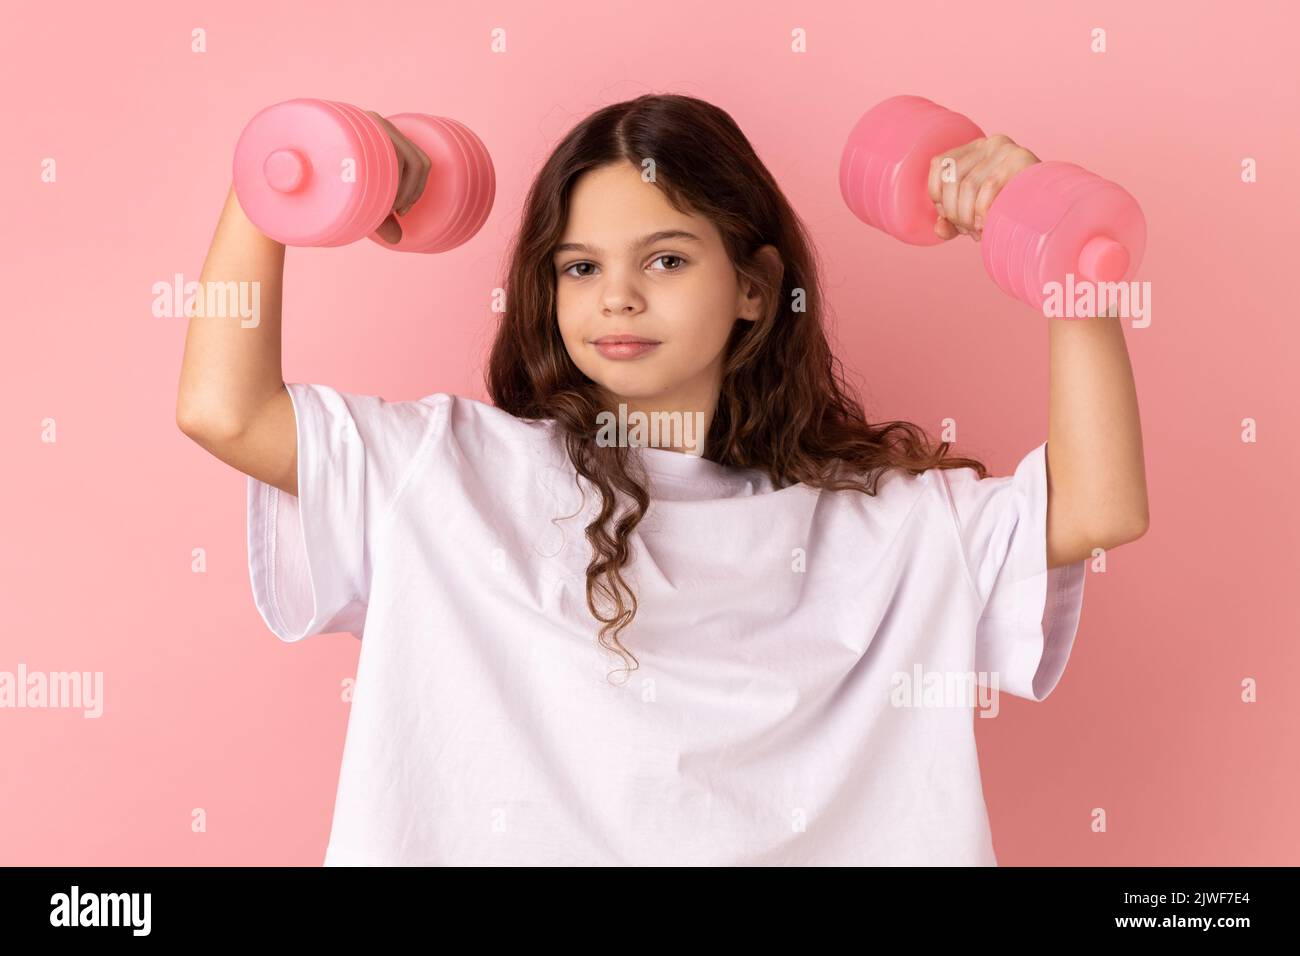 Portrait of strong athletic little girl wearing white T-shirt looking at camera and holding rose dumbbells in raised arms, healthy lifestyle. Indoor studio shot isolated on pink background. Stock Photo